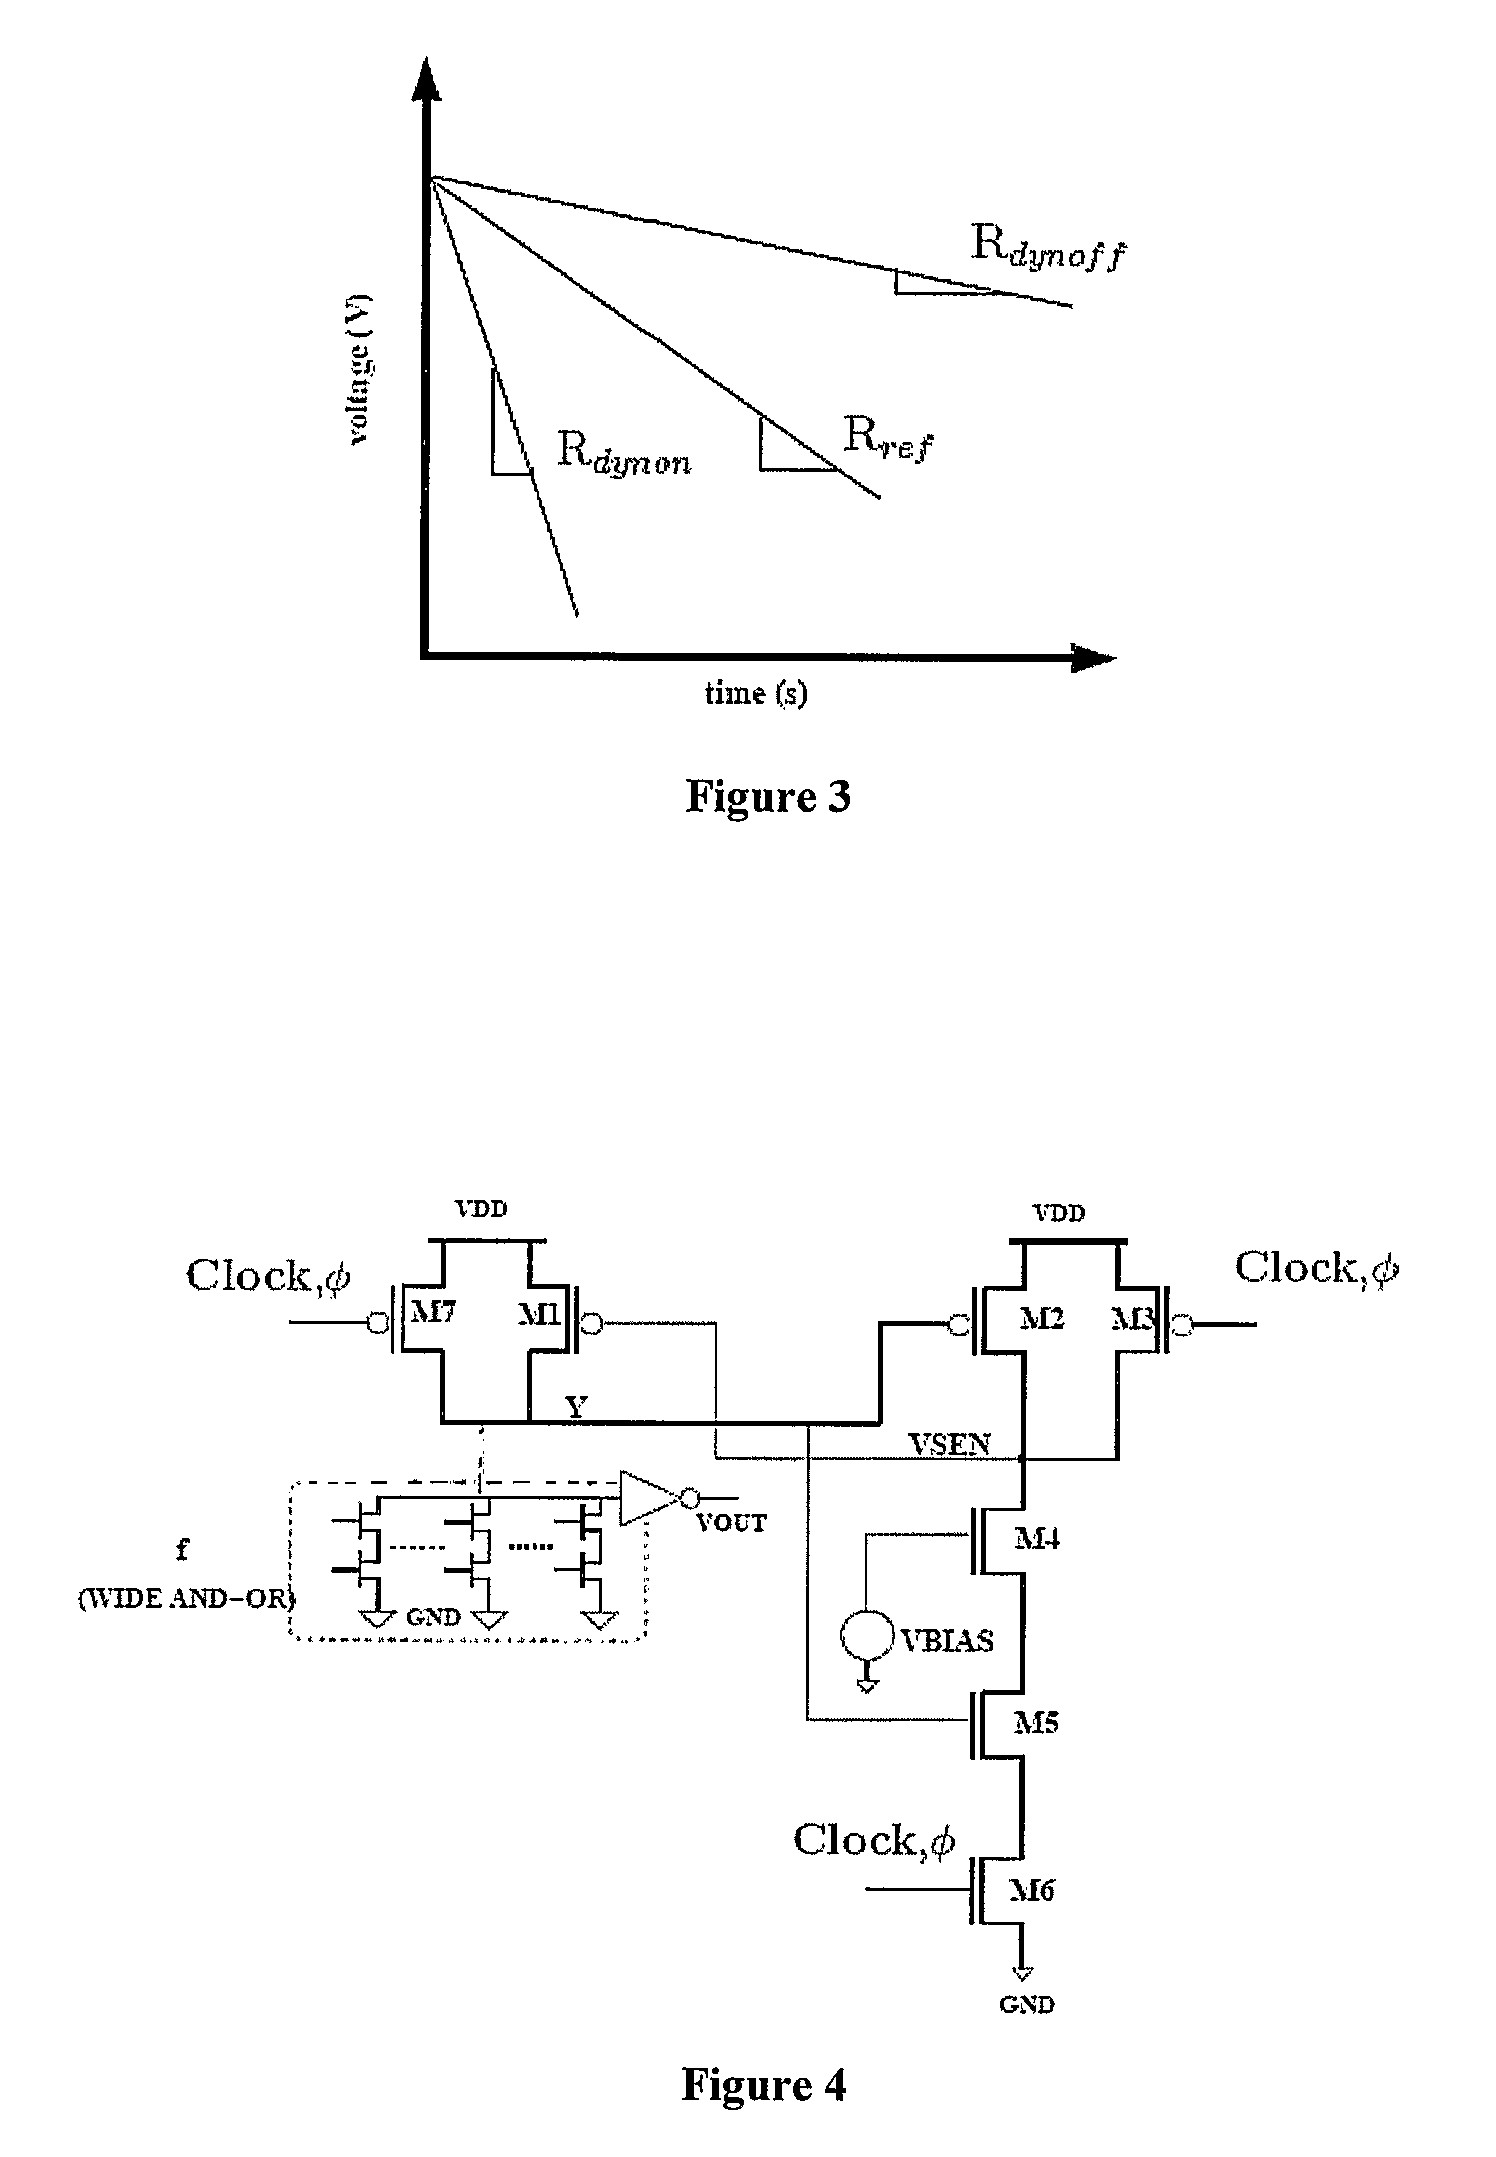 Adaptive keeper circuit to control domino logic dynamic circuits using rate sensing technique